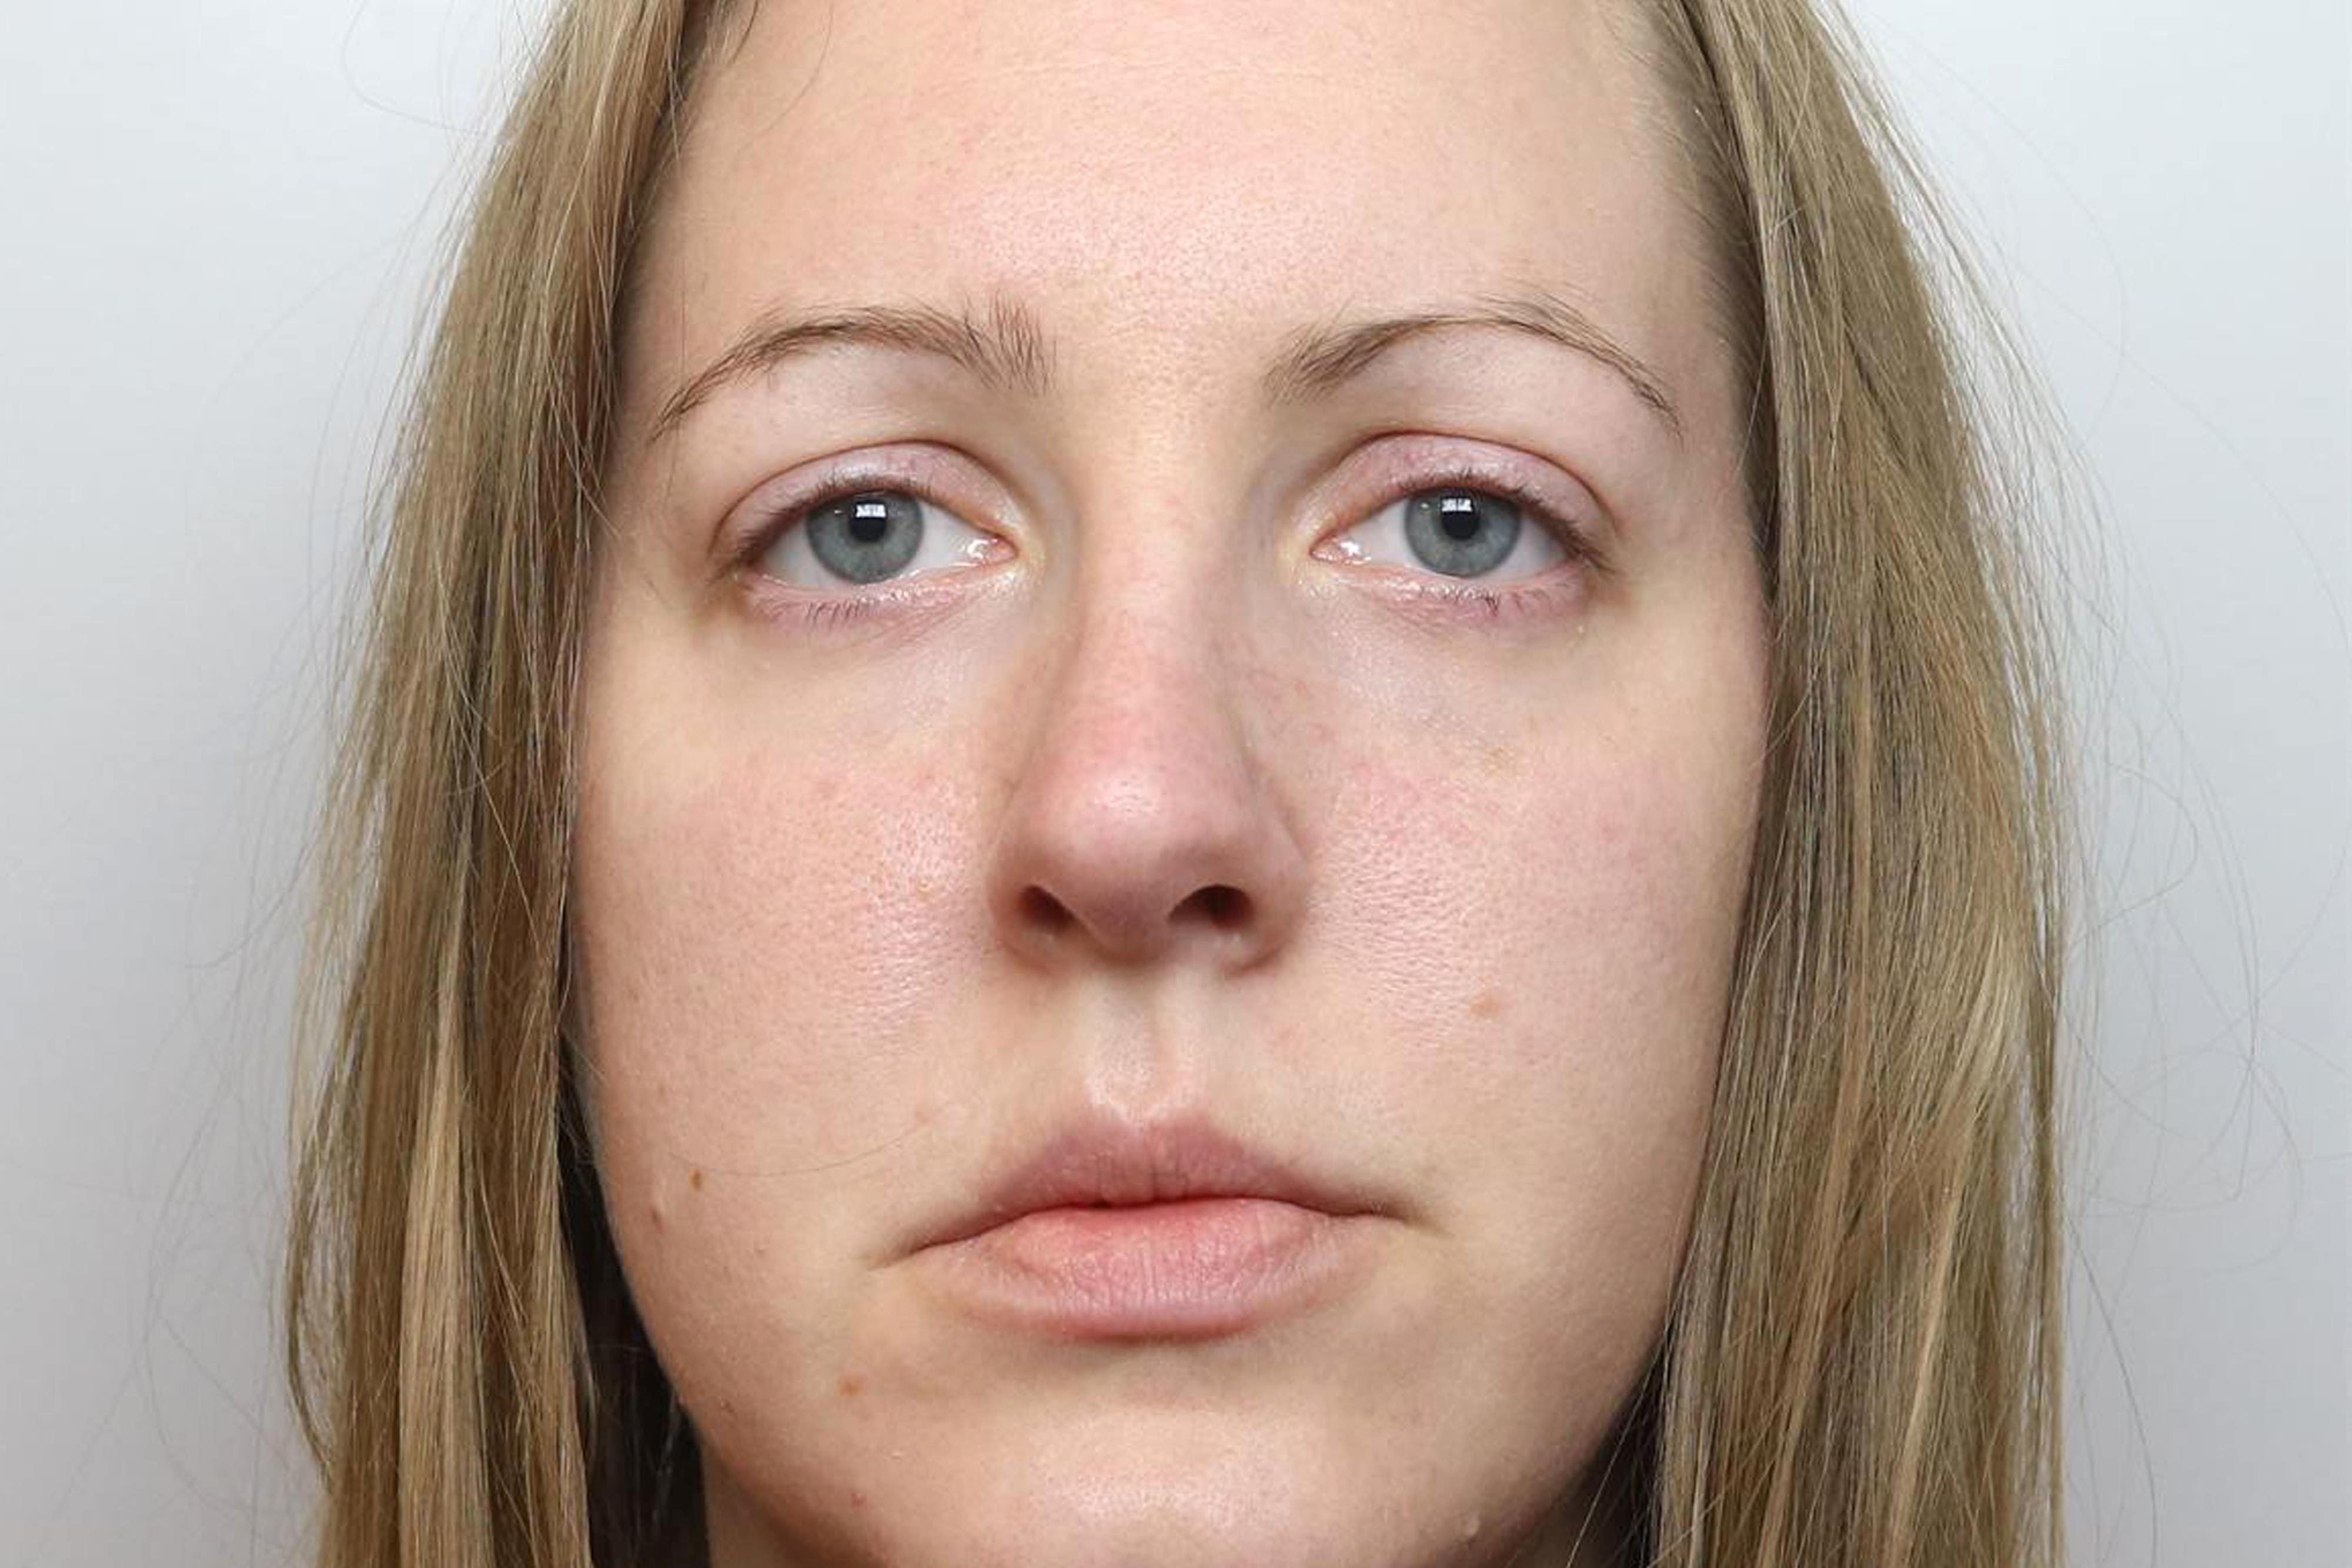 Letby has been jailed for life for murdering seven babies and attempting to kill six others (Cheshire Constabulary/PA)